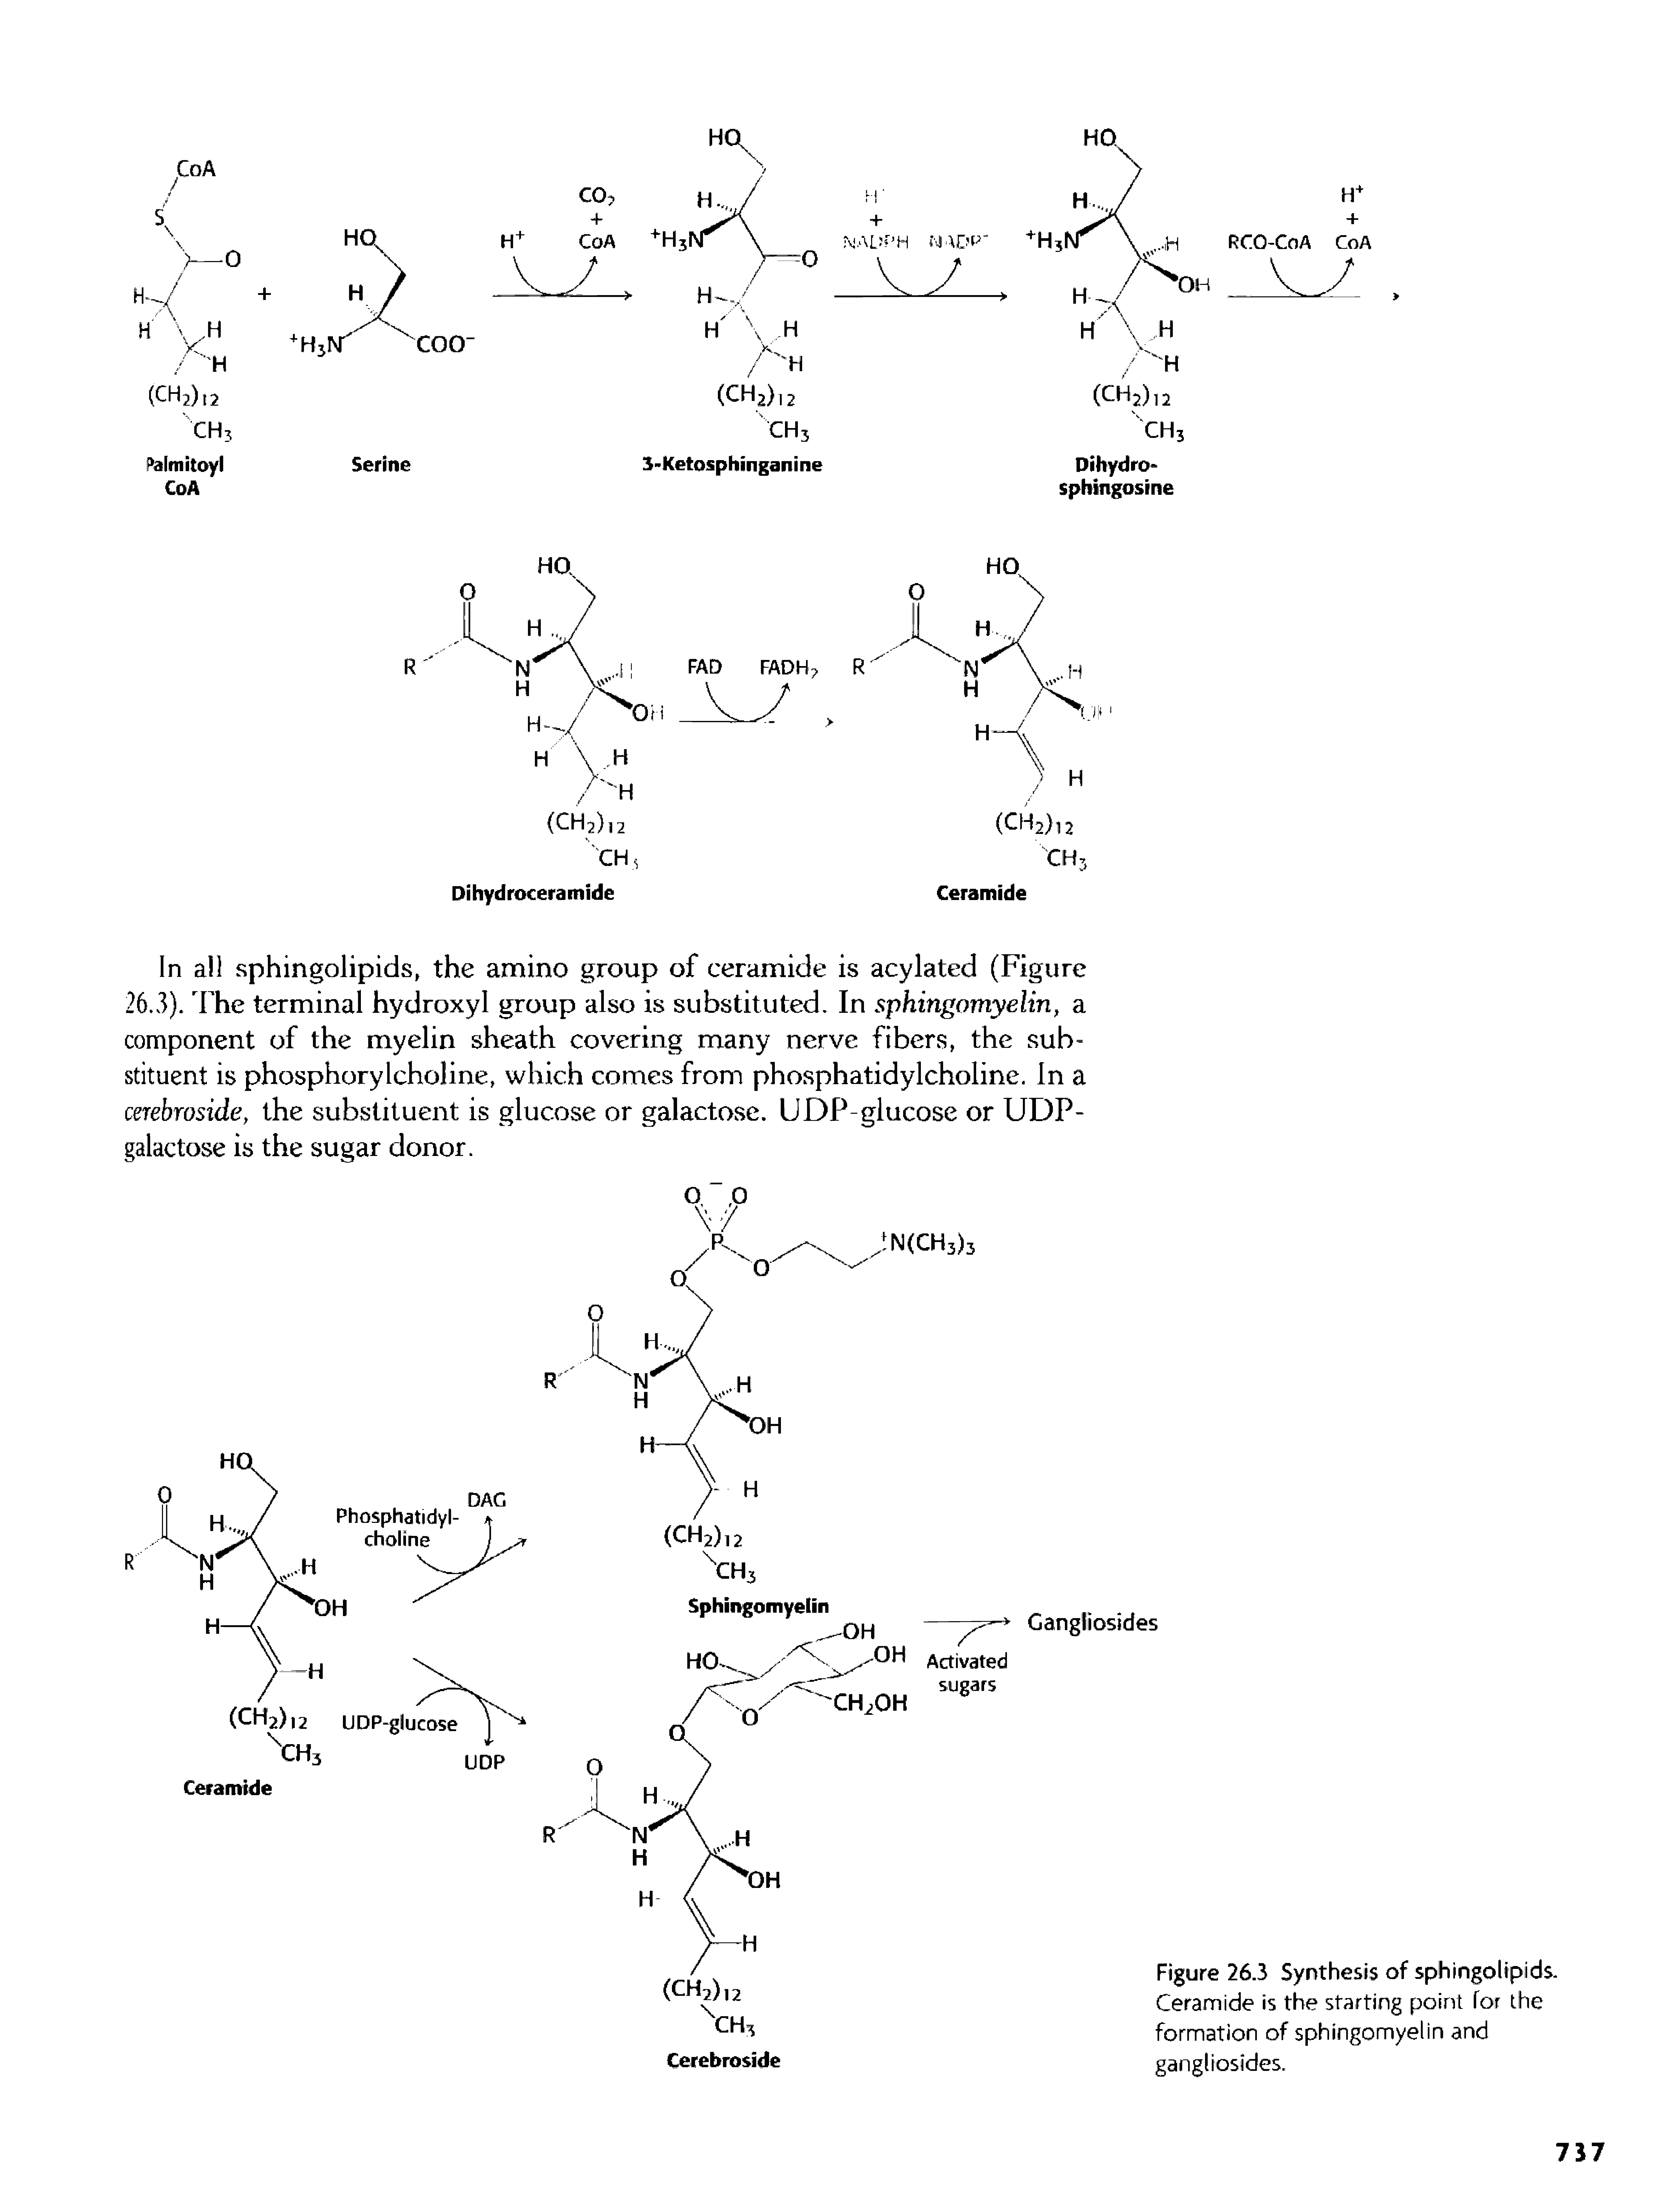 Figure 26.3 Synthesis of sphingolipids. Ceramide is the starting point for the formation of sphingomyelin and gangliosides.